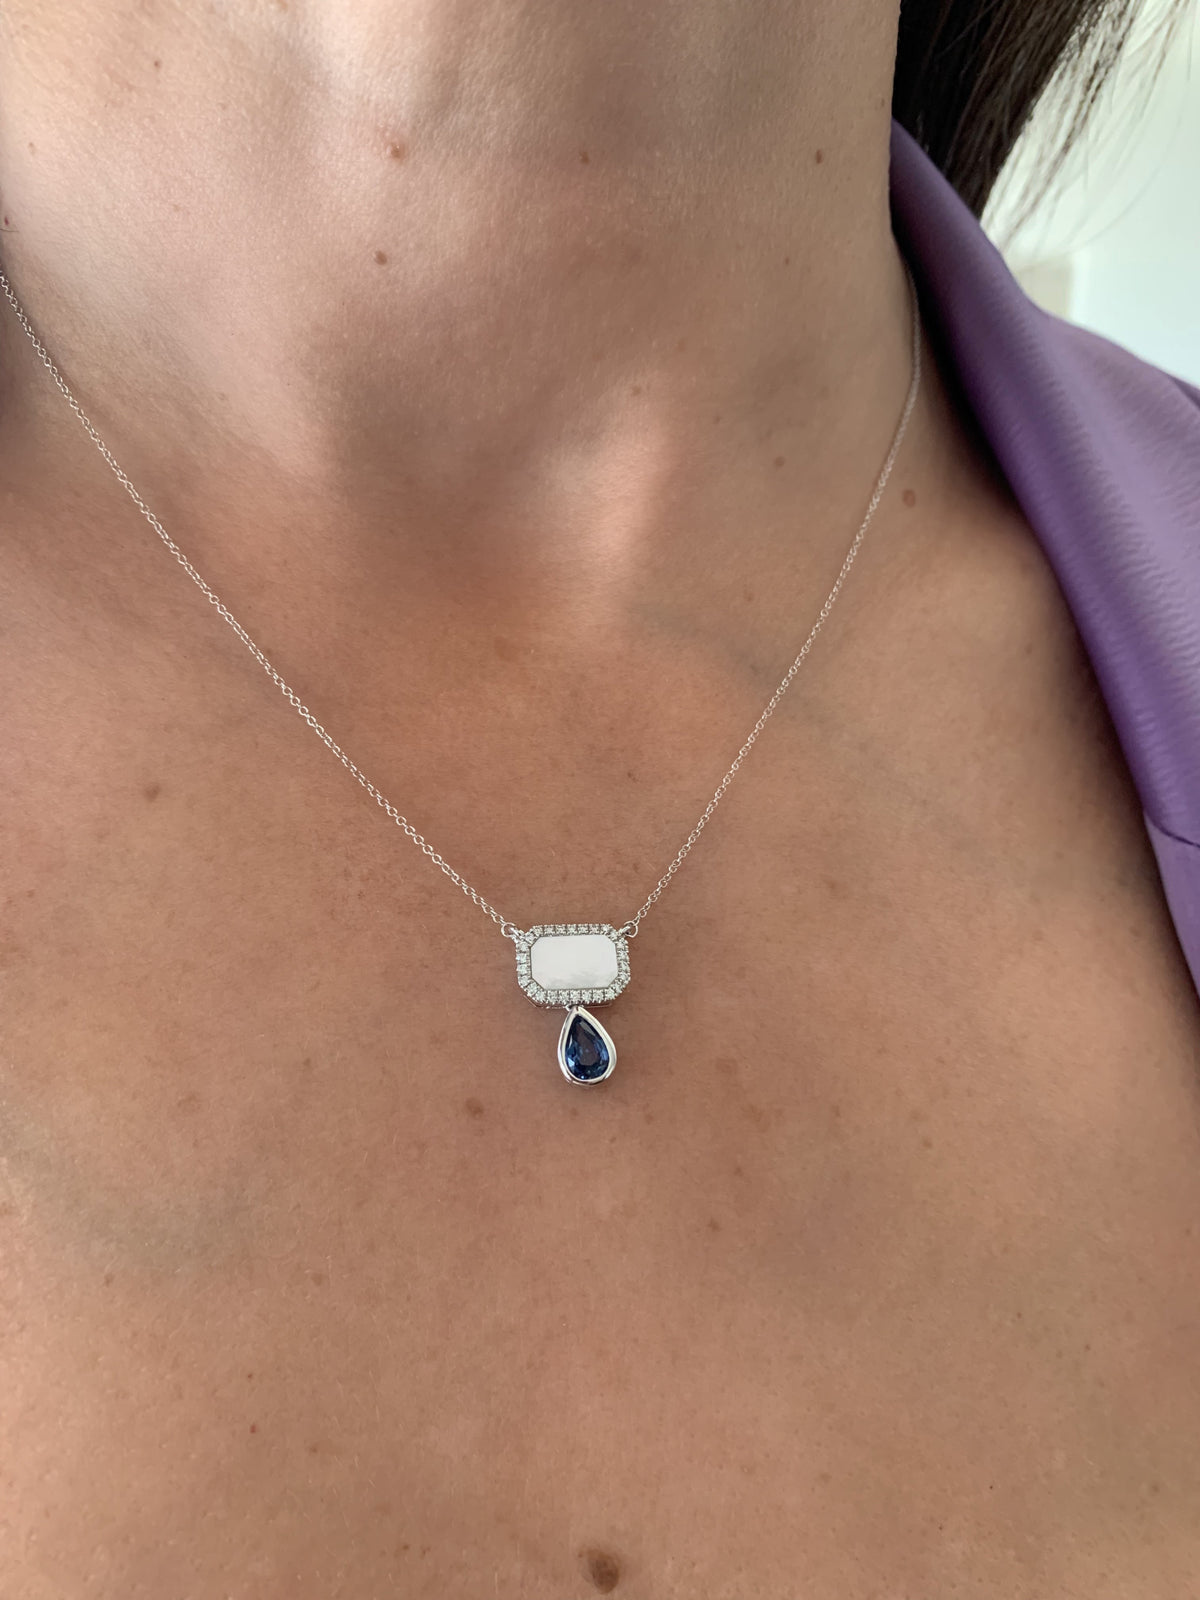 Rectangle Mother of Pearl with Drop Blue Sapphire & Diamond Pendant on 18K White Gold Necklace. Carefully curated into the Modern Designs Collection. 